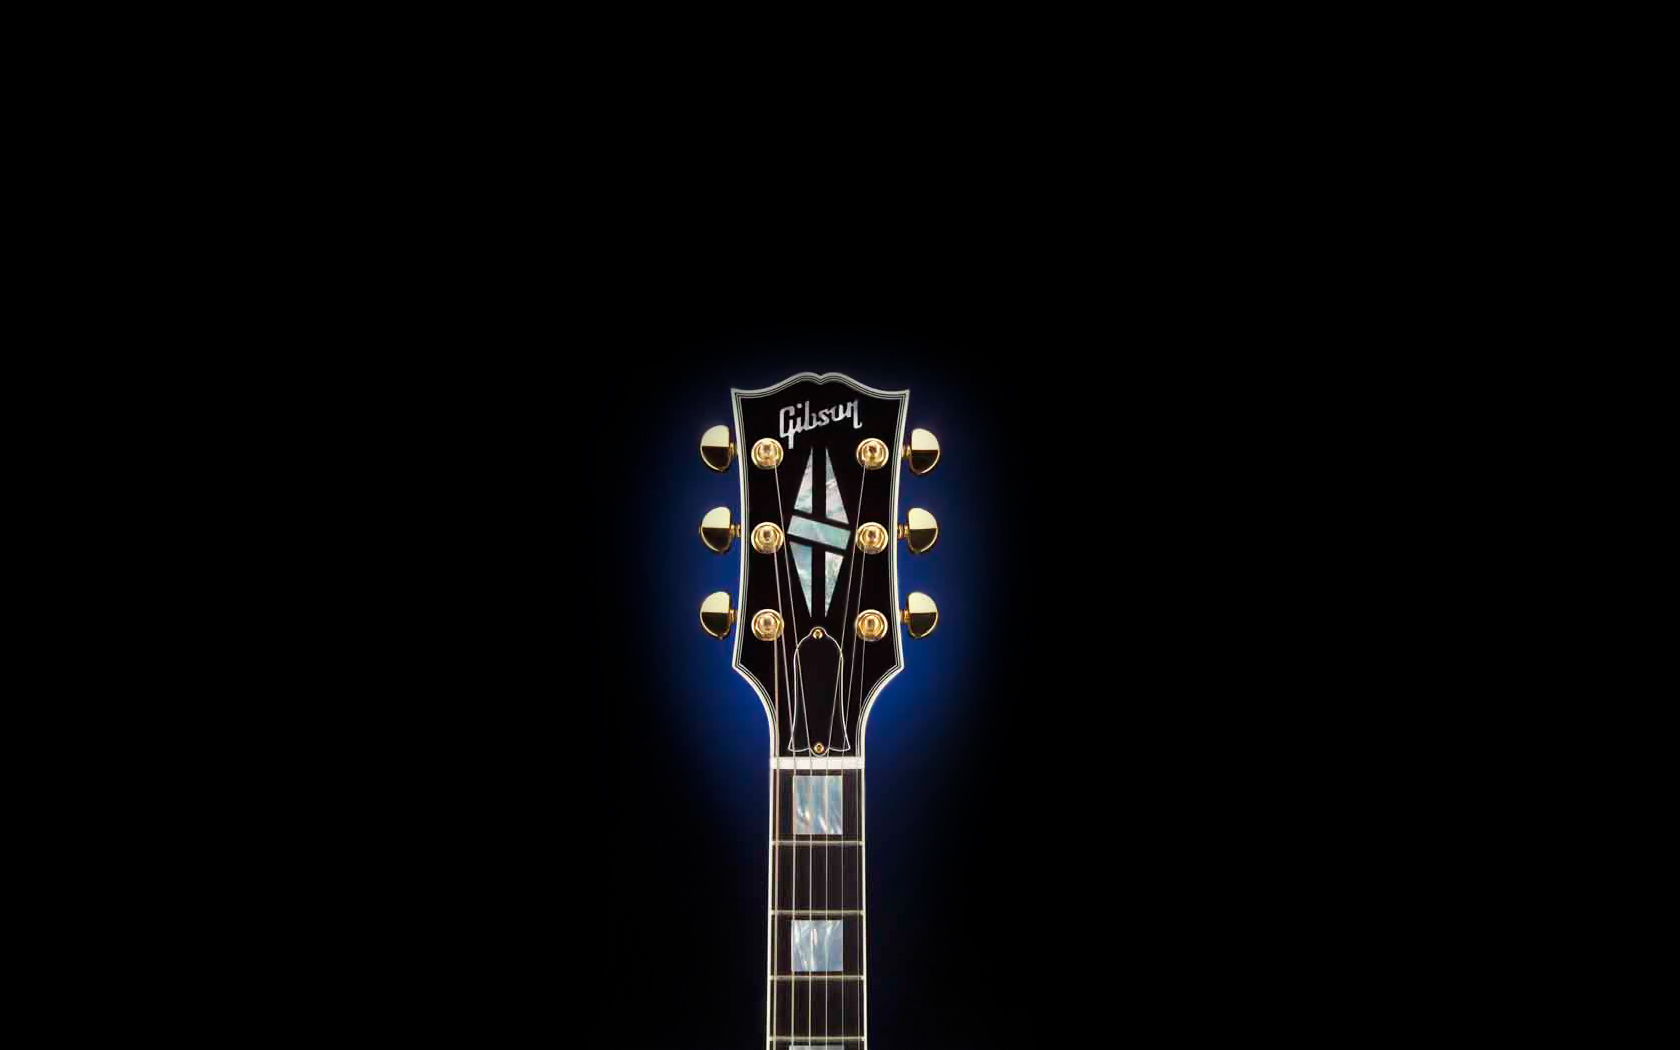 Gibson Headstock Wallpaper By Cmdry72